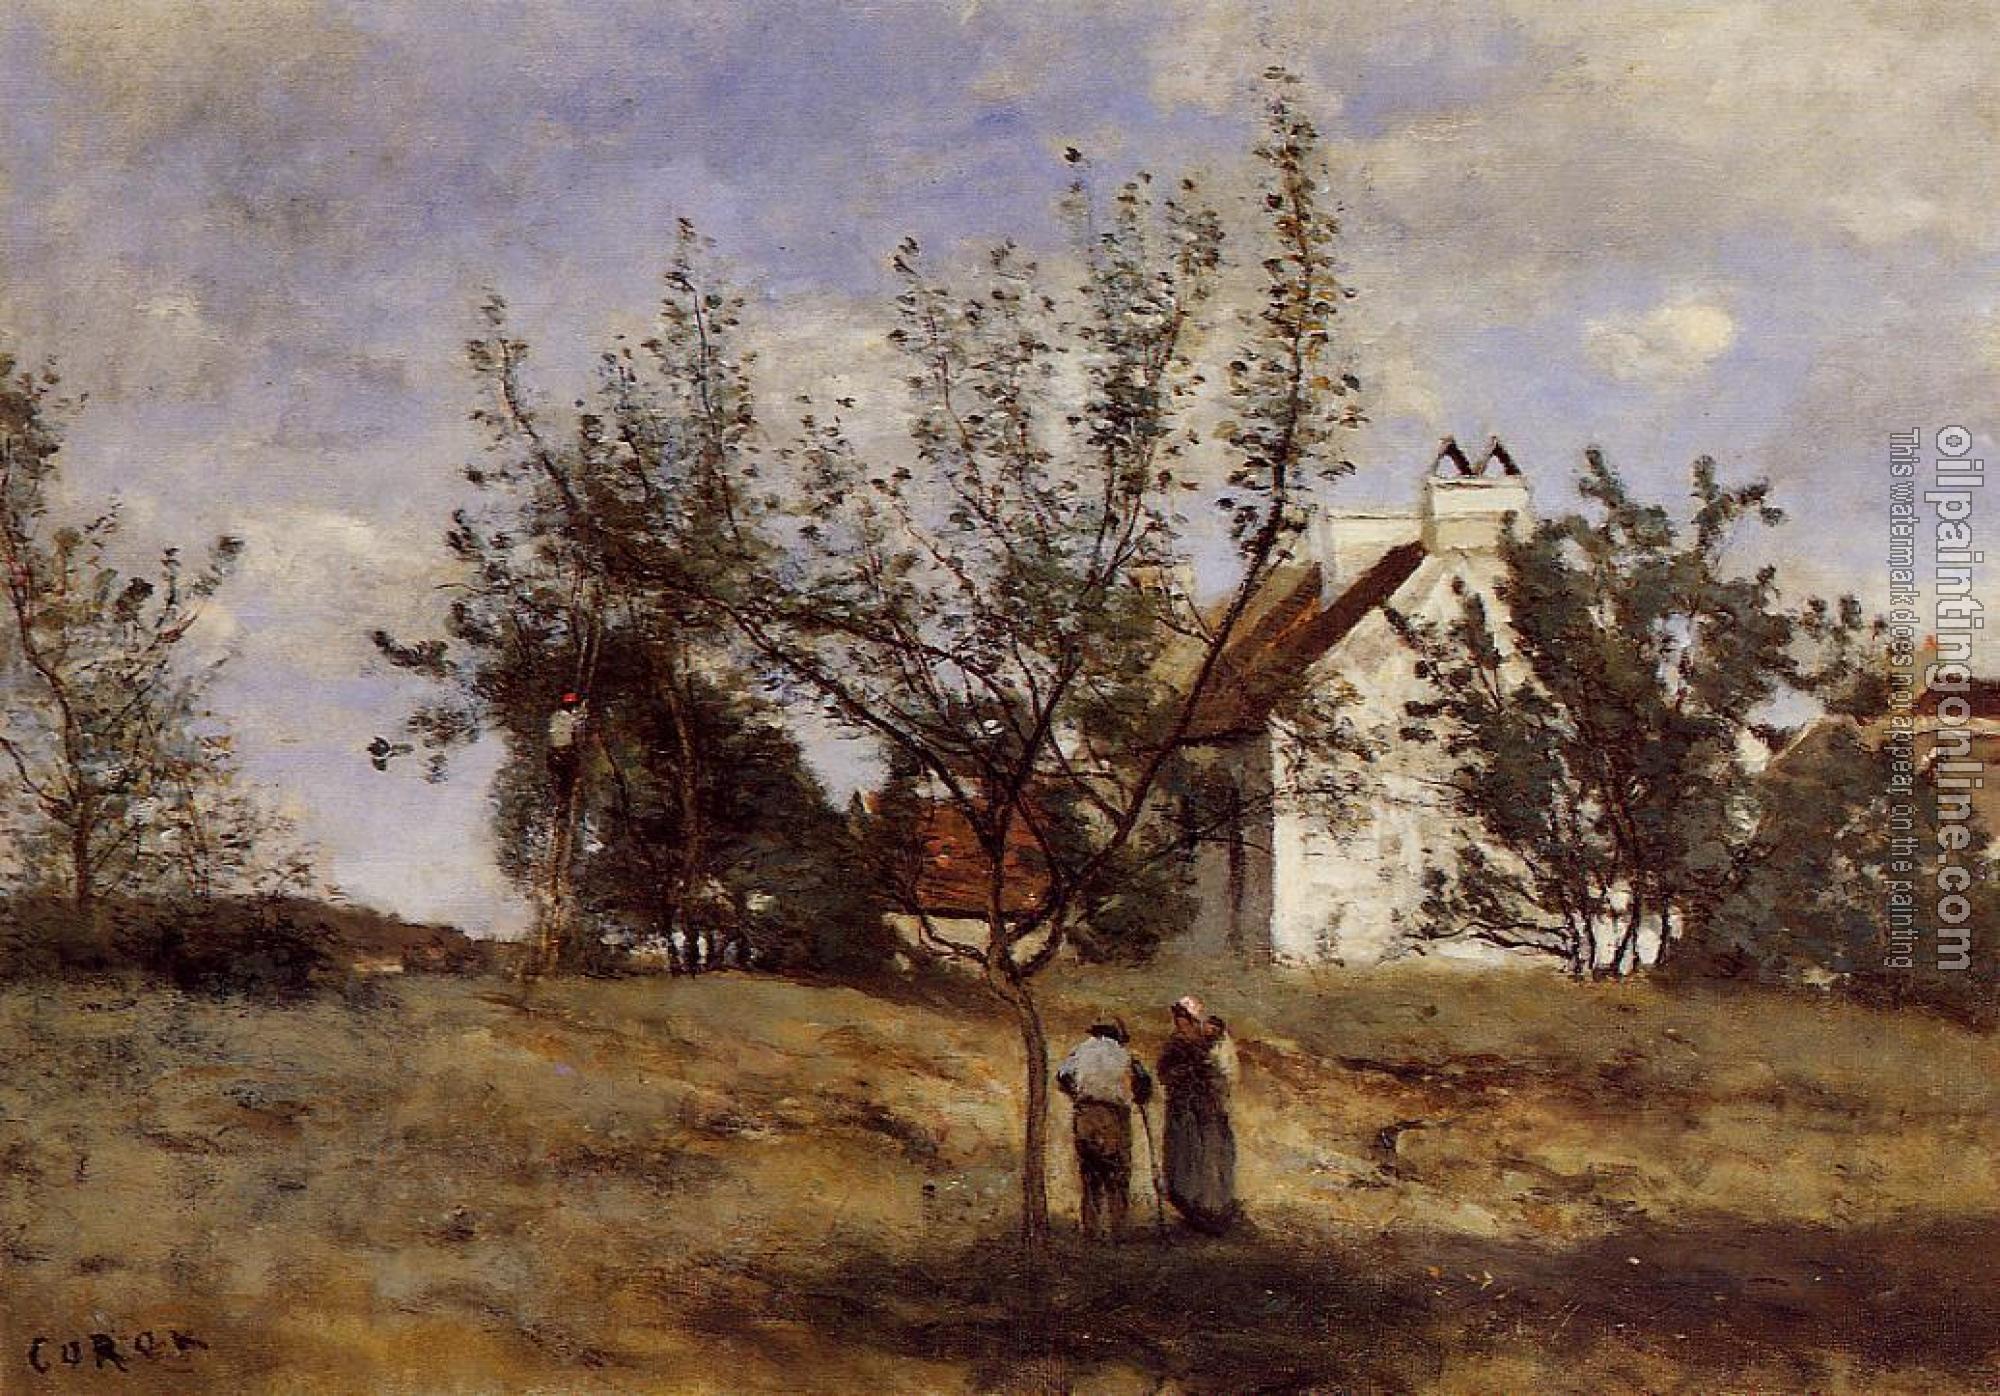 Corot, Jean-Baptiste-Camille - An Orchard at Harvest Time